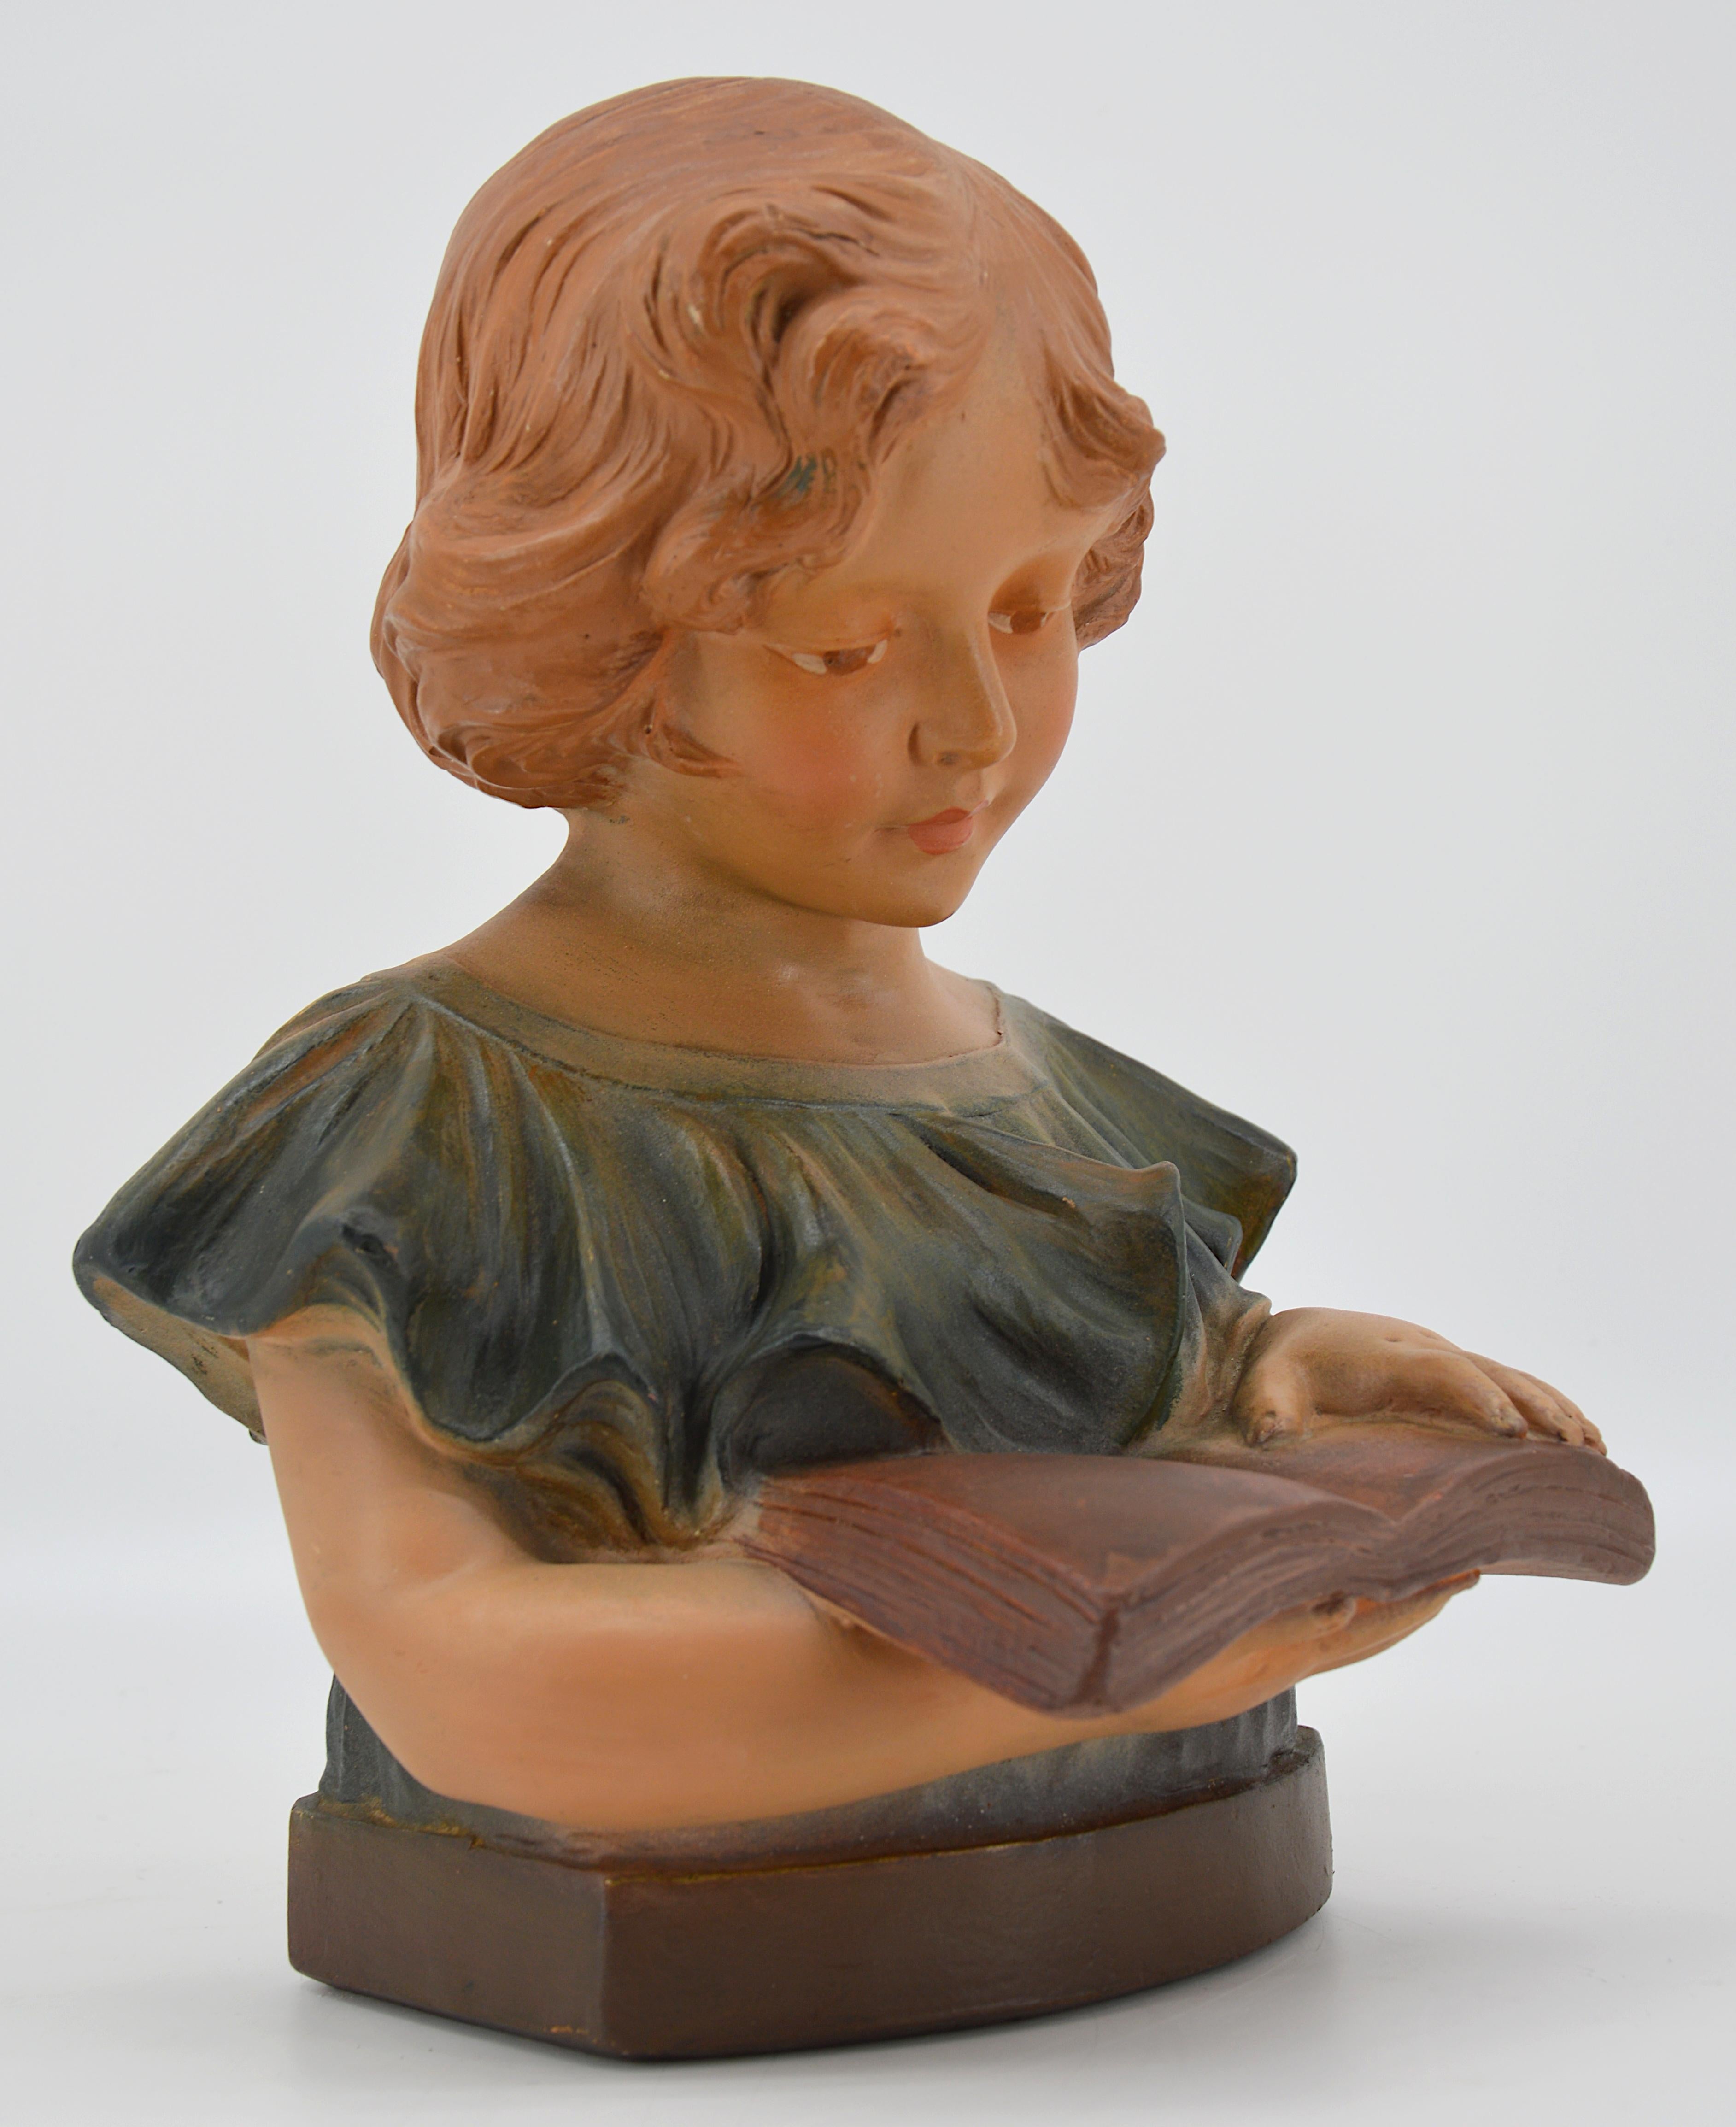 French Art Deco plaster child sculpture, France, 1920s. Child reading a book. Polychrome plaster. Measures: height : 11.4